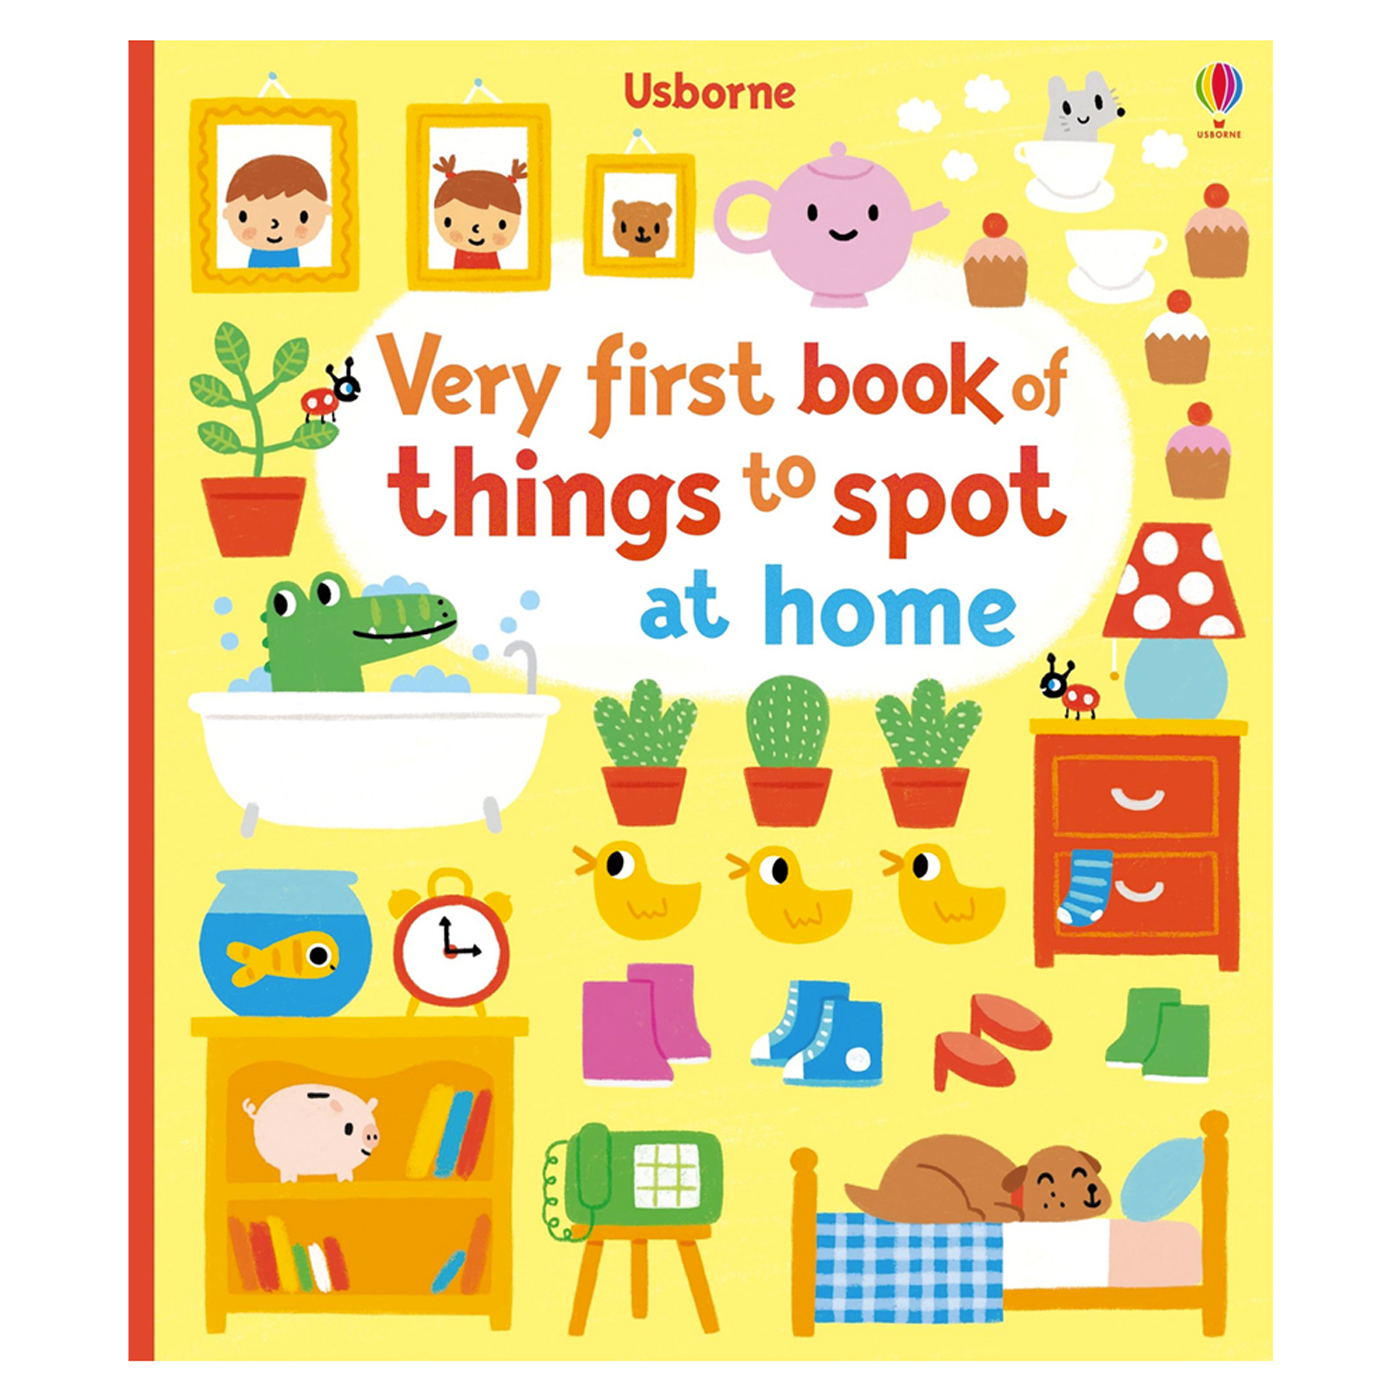 USBORNE Very first book things to spot at home